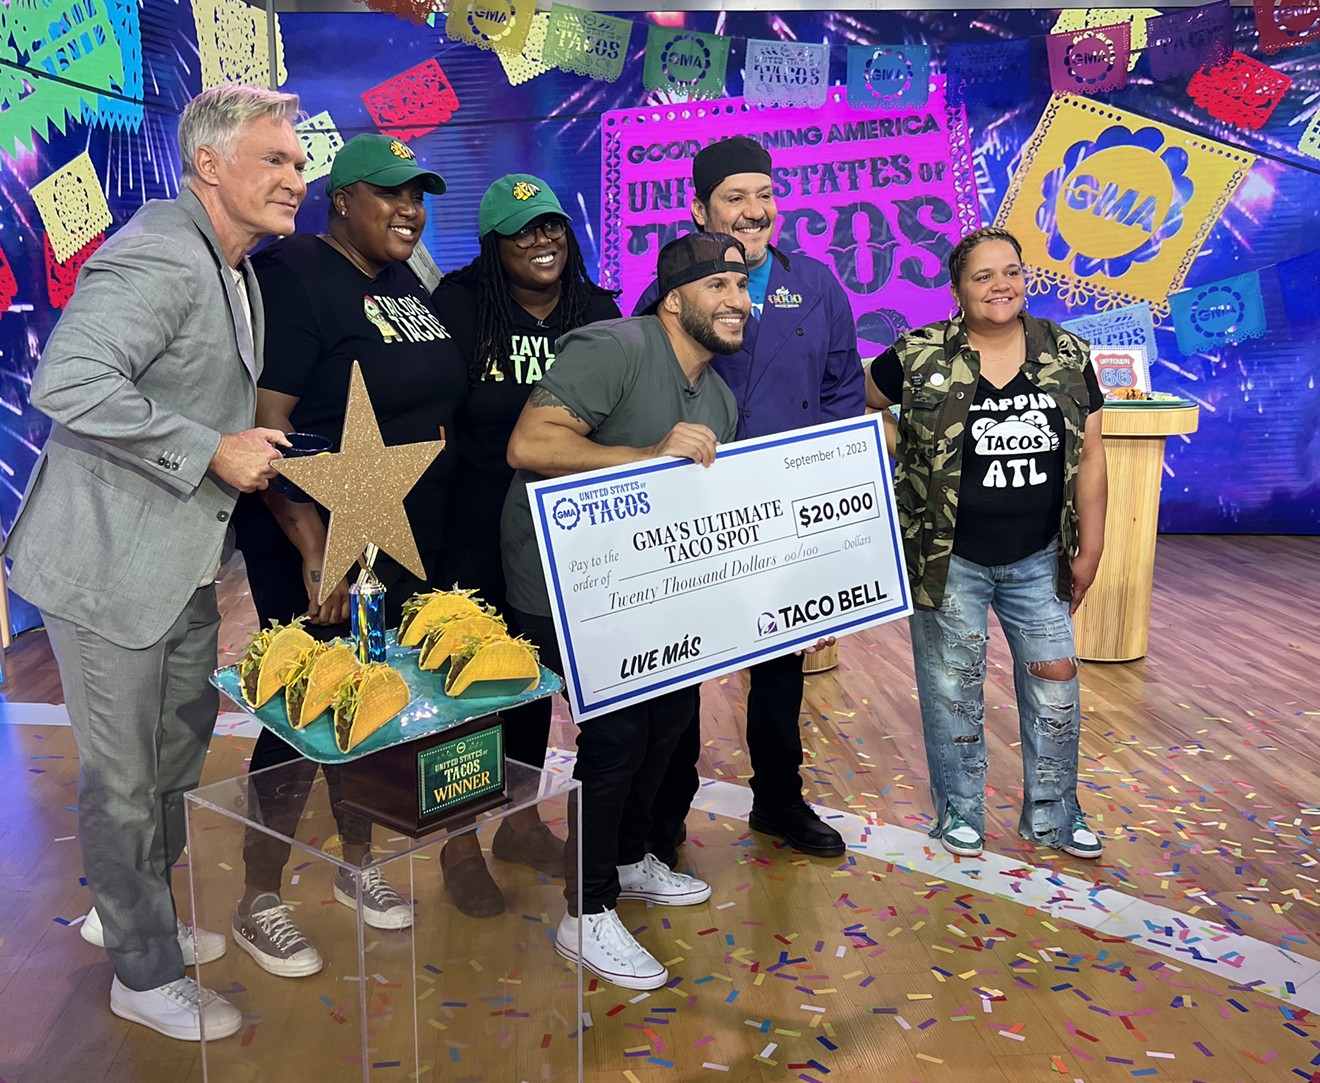 Chef/owner Nuno Grullon of Miami's Uptown 66 taqueria won Good Morning America's "United States of Tacos" competition.